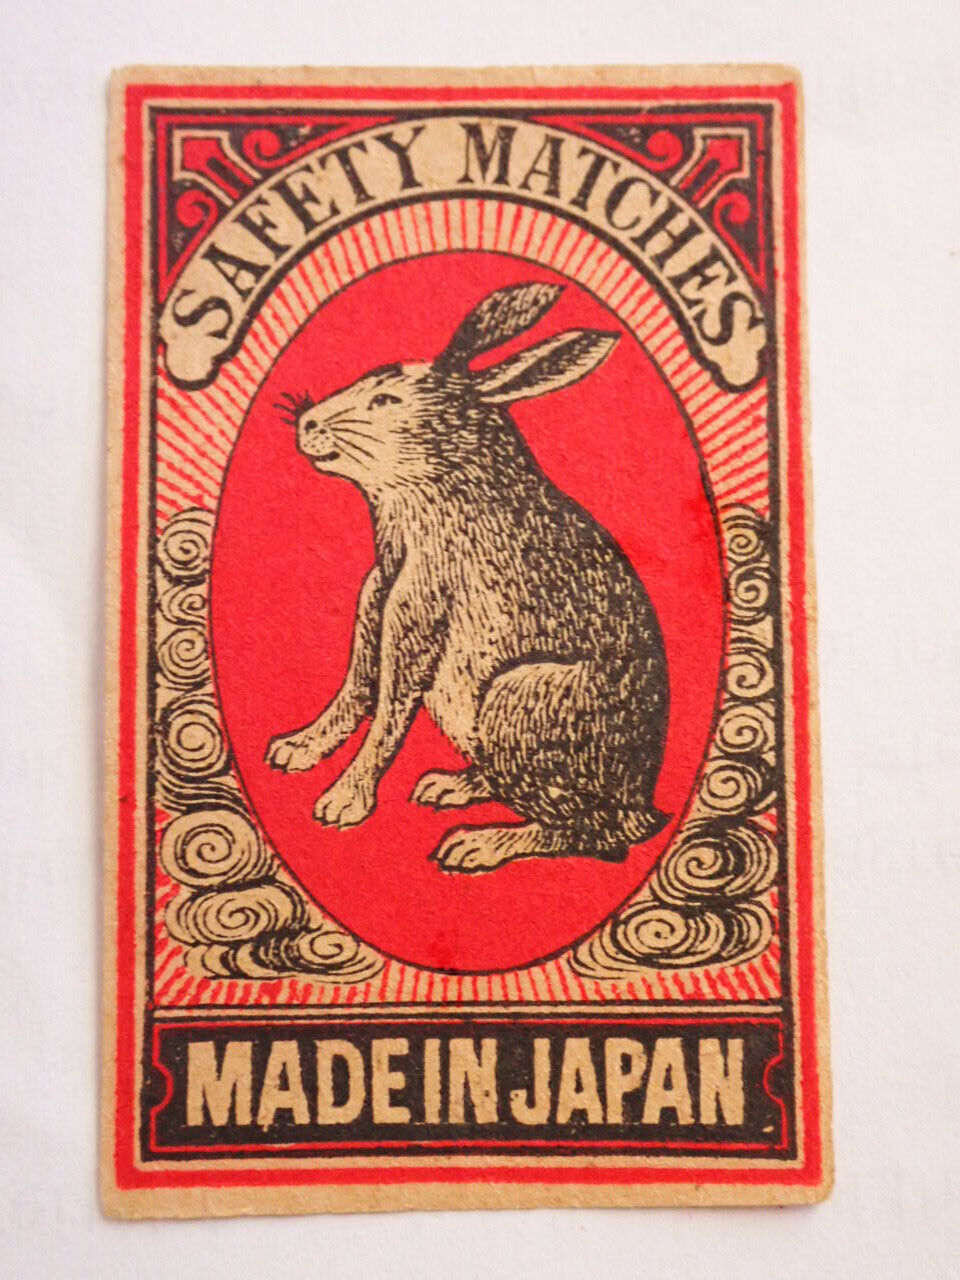 RABBIT or HARE SAFETY MATCHES MATCH BOX LABEL c1900s MADE in JAPAN